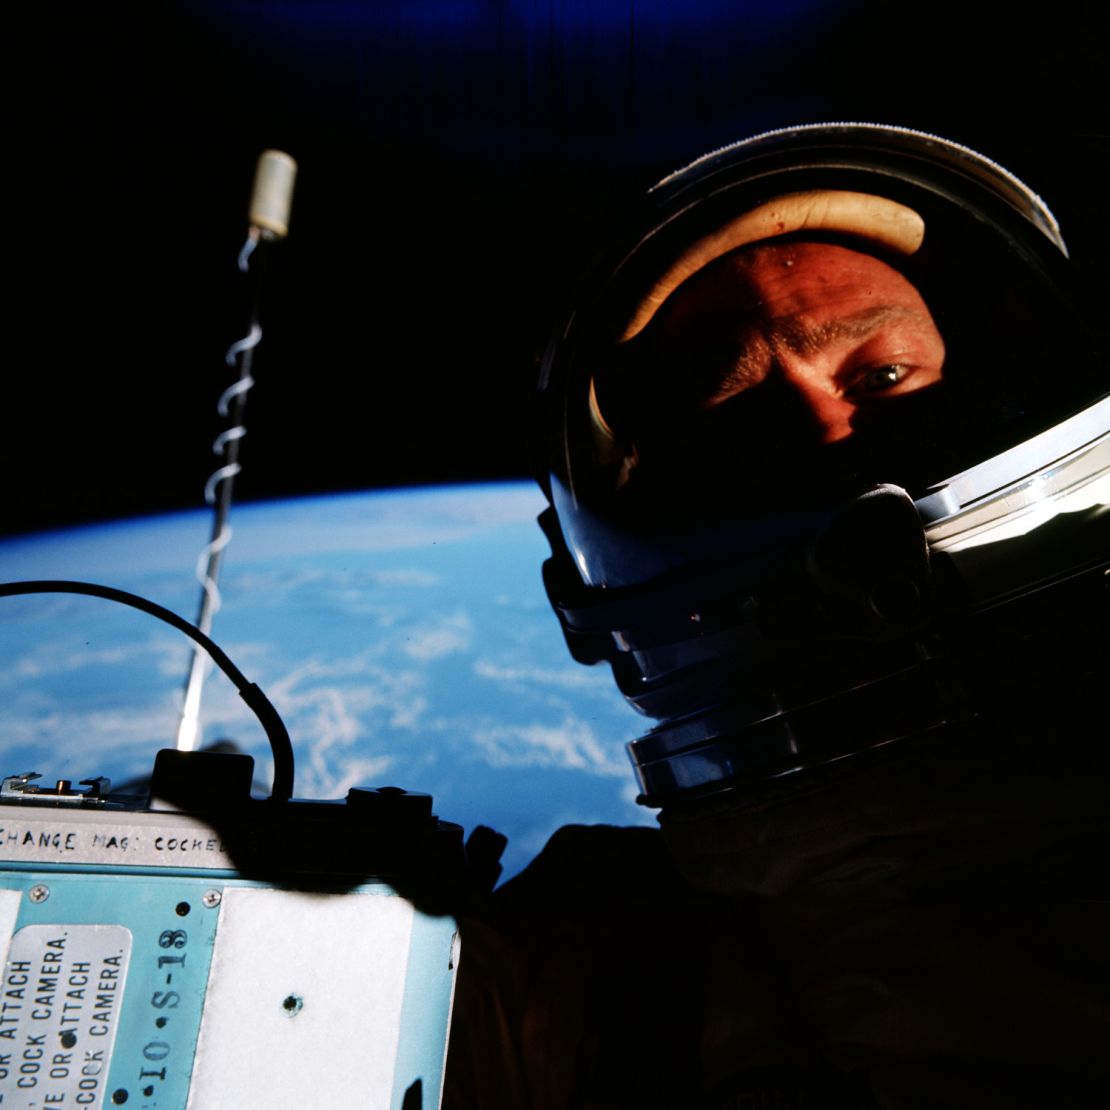 Buzz Aldrin takes what was probably the first "space selfie" during his Gemini 12 mission in 1966.